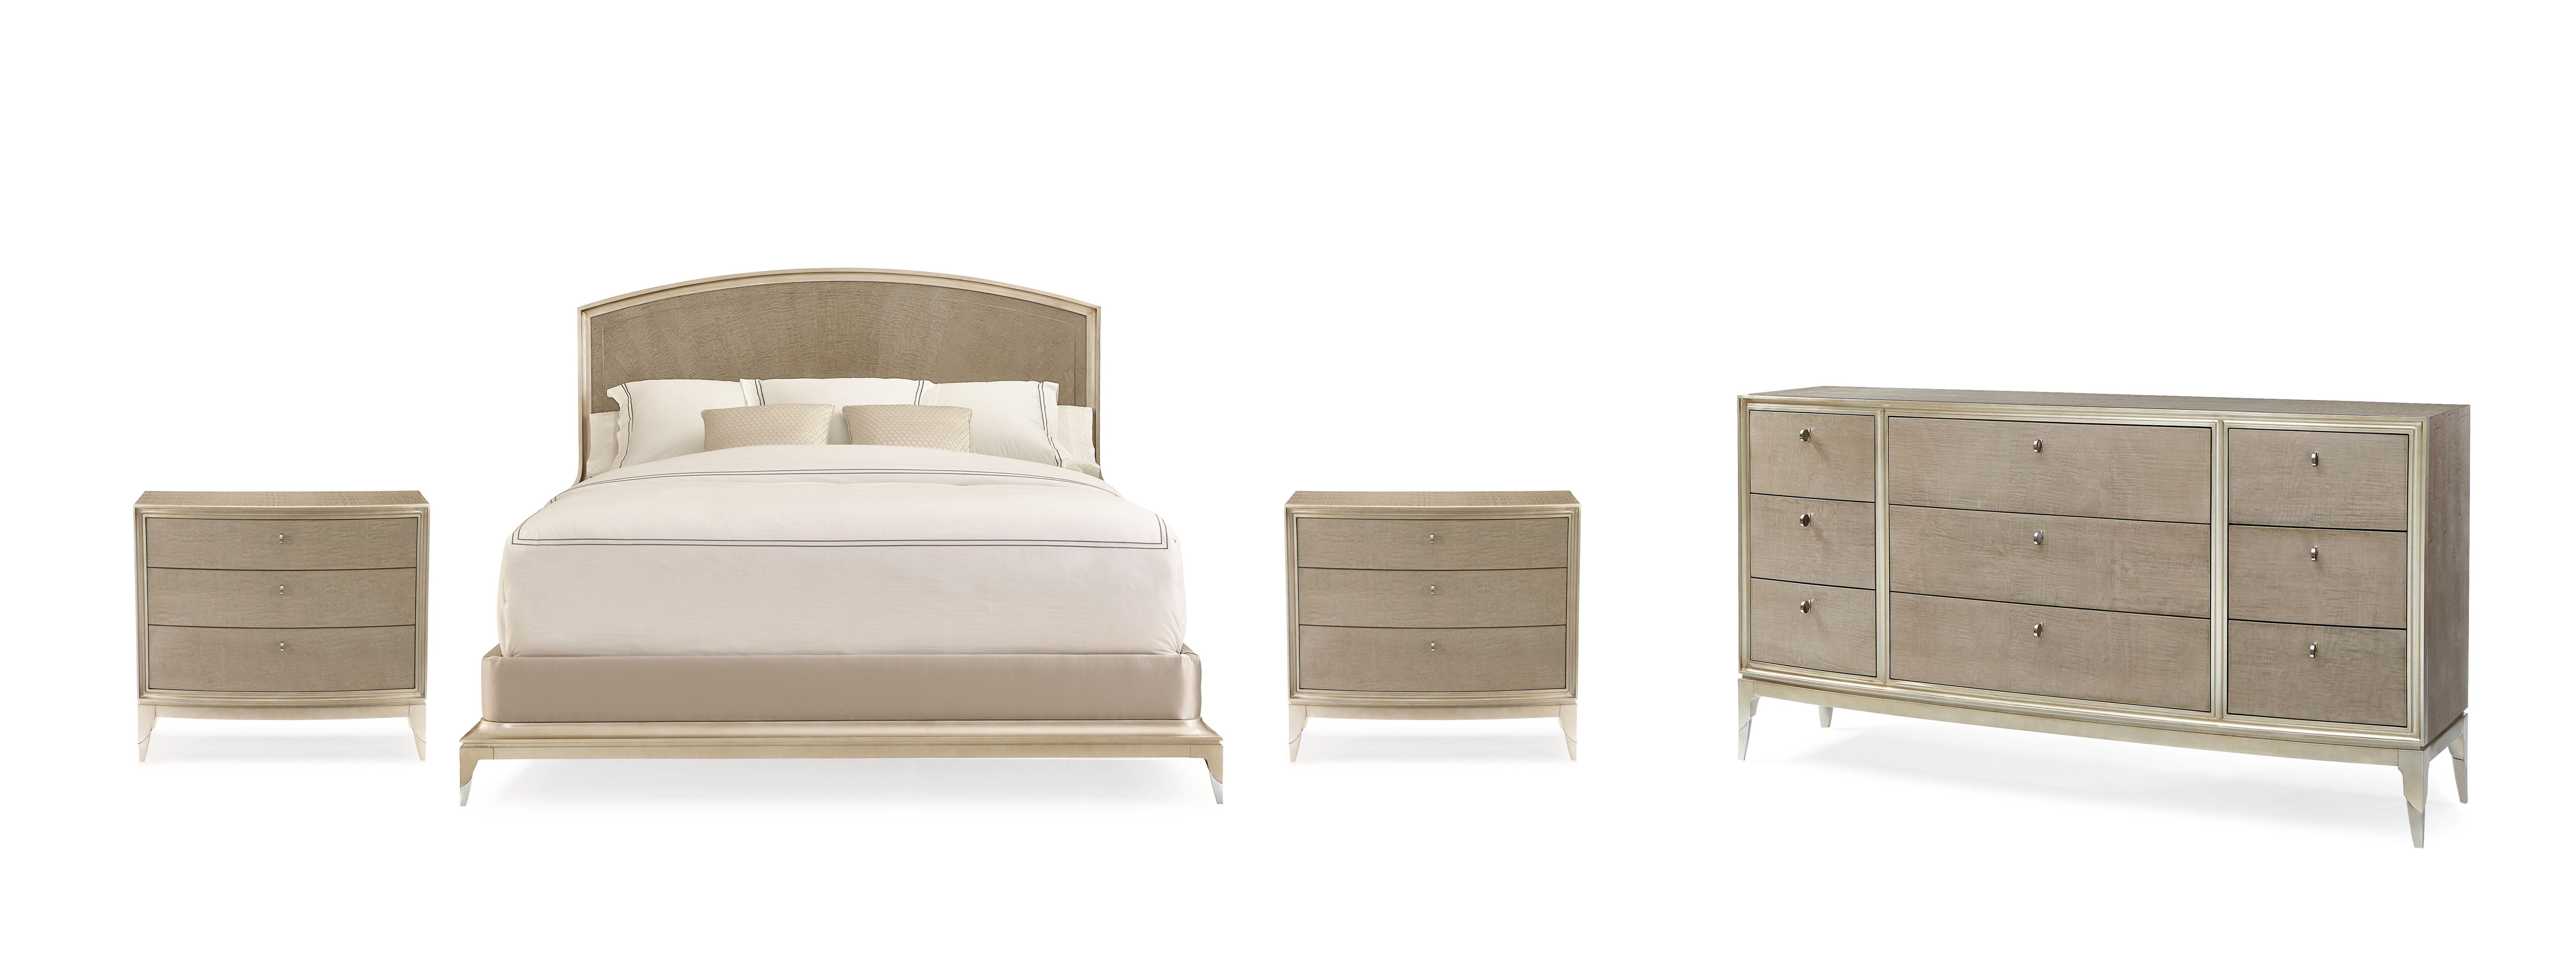 Contemporary Platform Bedroom Set RISE TO THE OCCASION / RISE AND SHINE CLA-417-125-Set-4 in Silver, Beige 